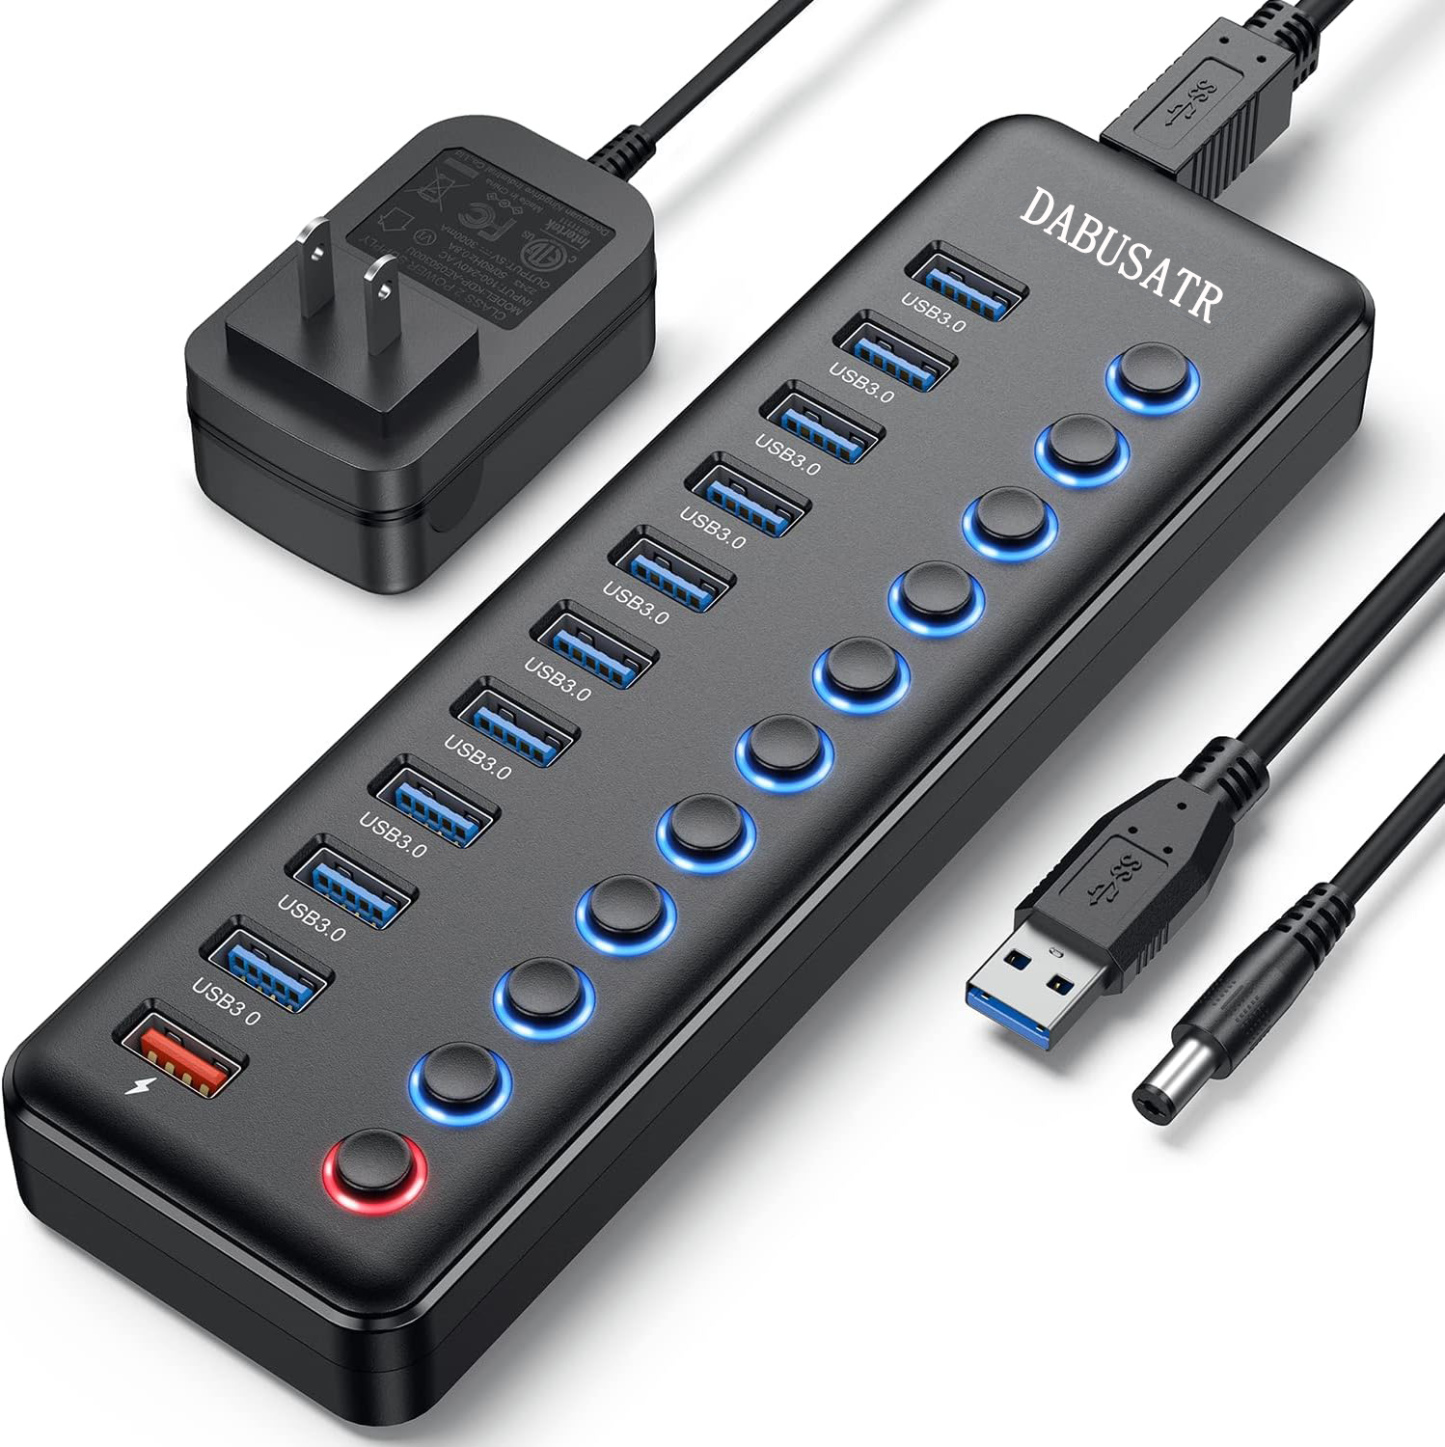 DABUSTAR USB hubs, Wenter 11-Port USB Splitter Hub (10 Faster Data Transfer Ports+ 1 Smart Charging Port) with Individual LED On/Off Switches, USB Hub 3.0 Powered with Power Adapter for Mac, PC